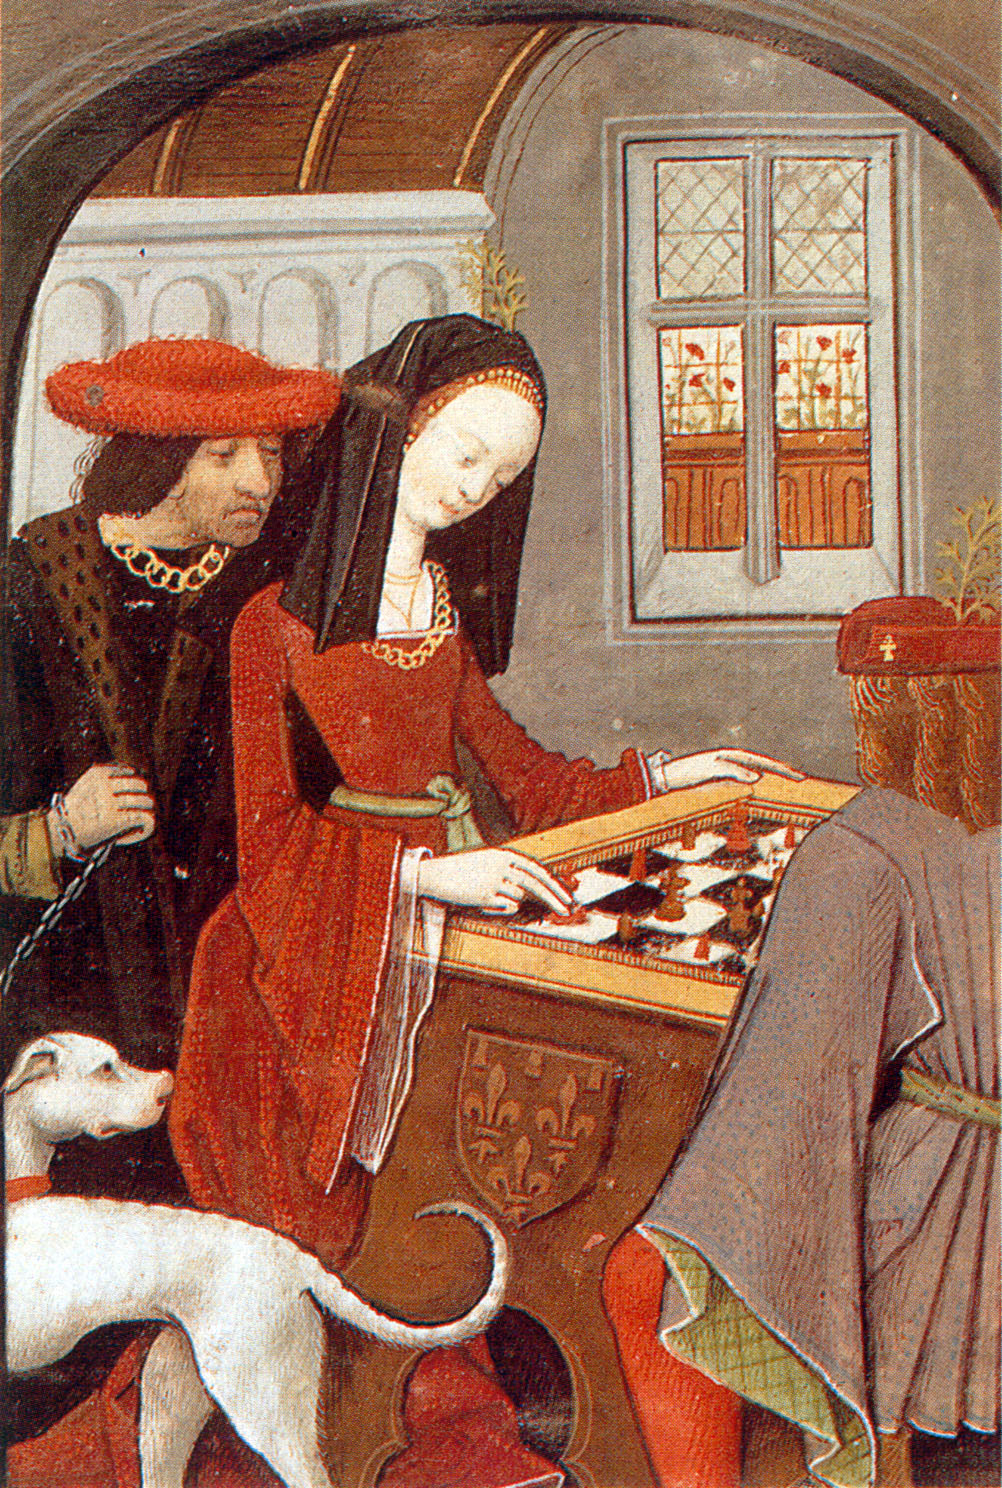 1500 (approx) - from Book of Chess Lovers